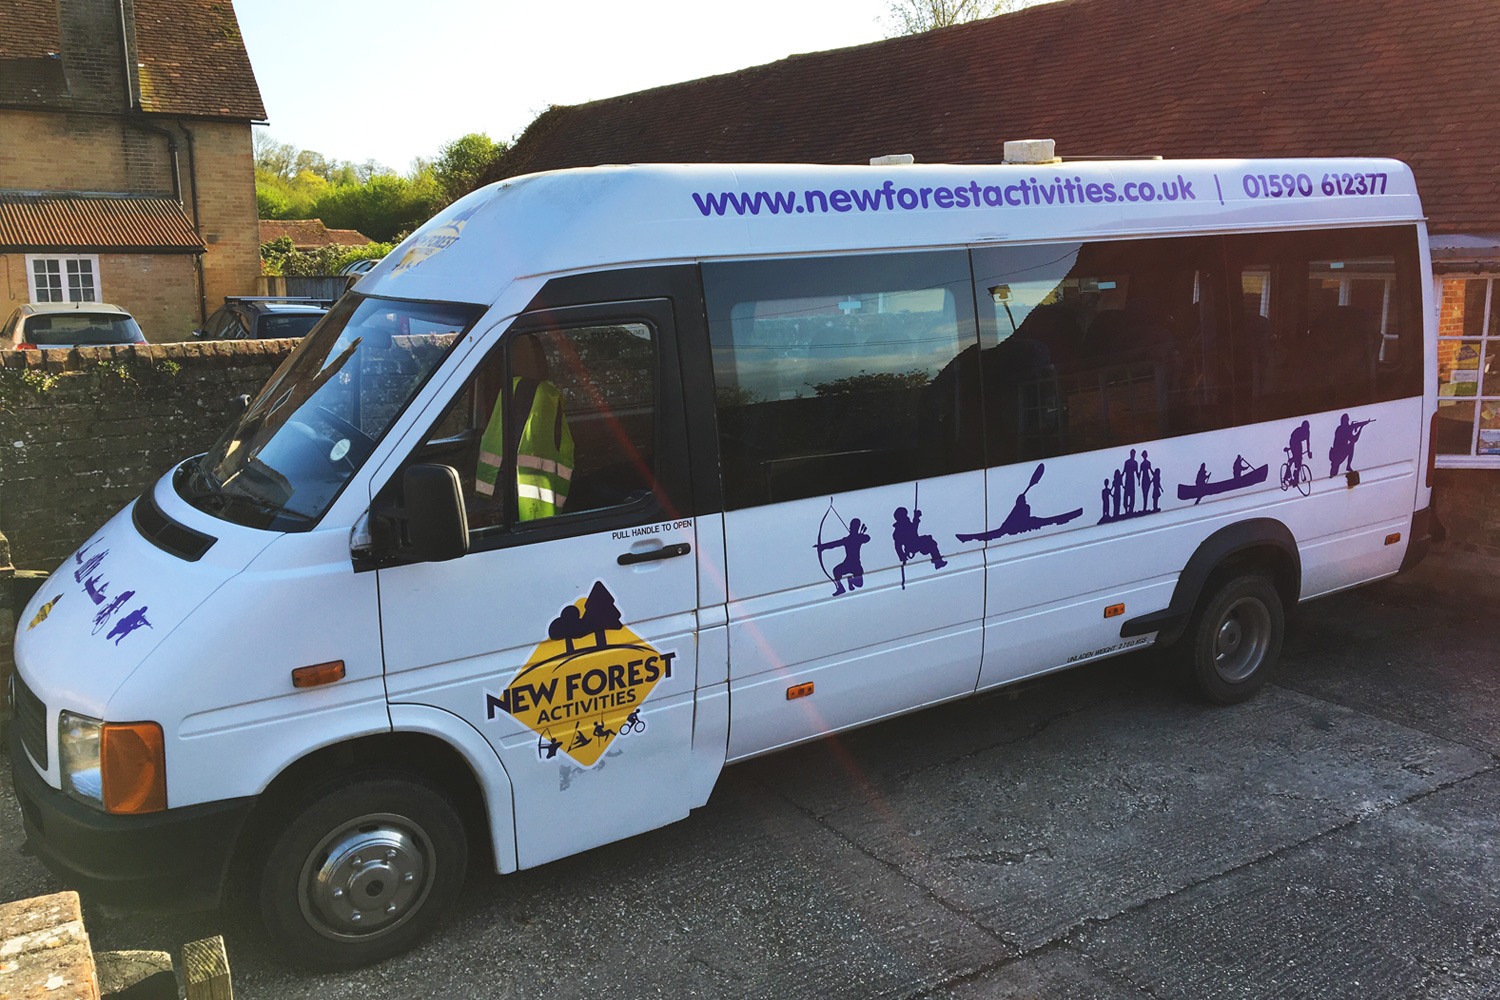 We can transfer you between youth activities with our 16 seater mini-bus.